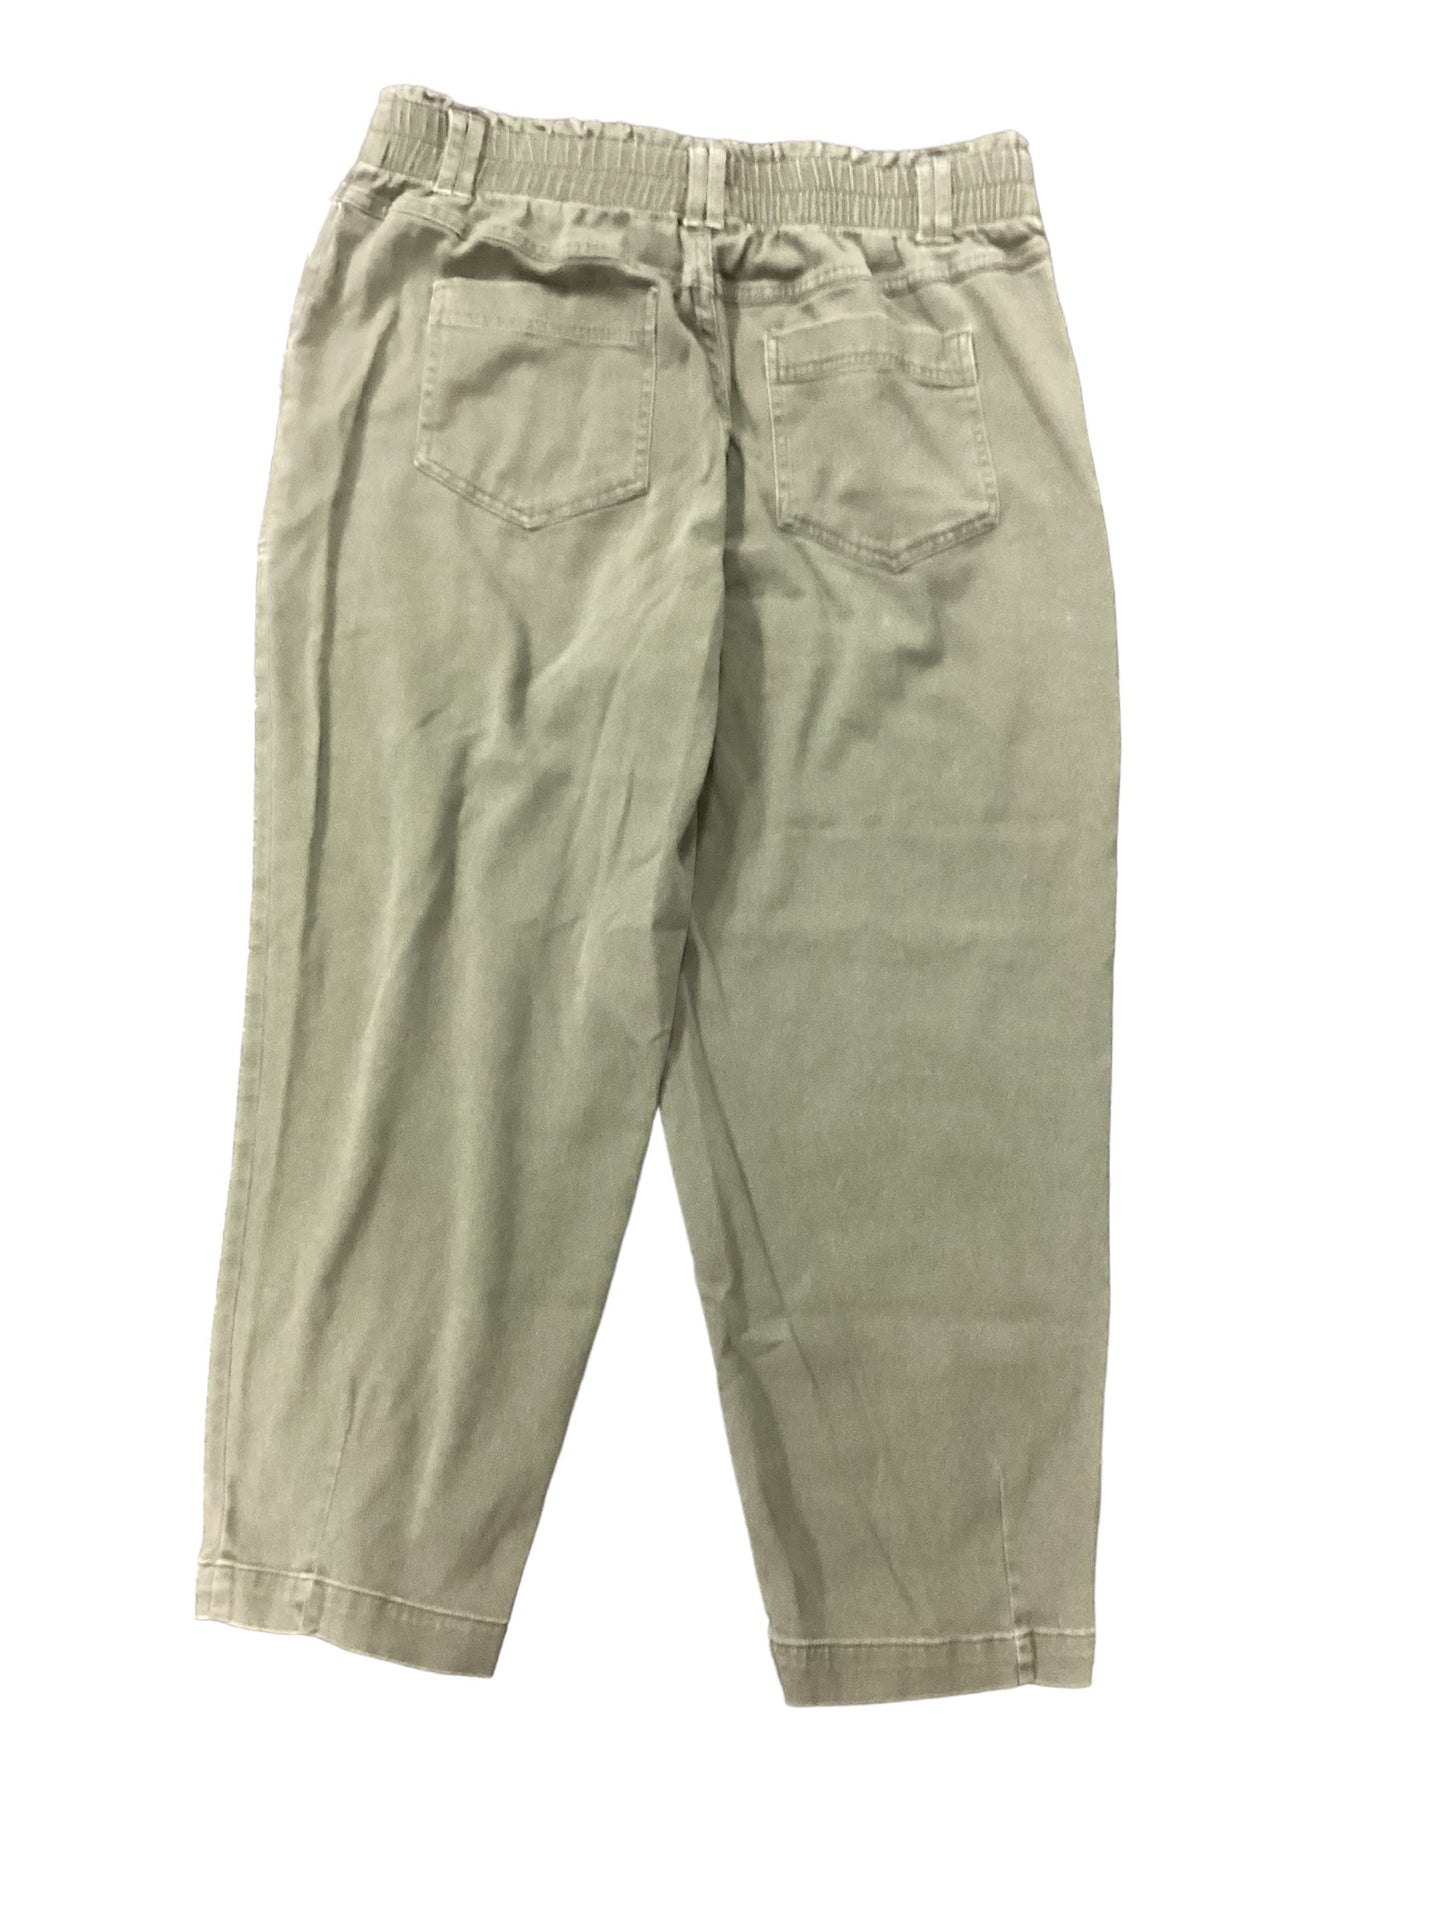 Pants Cargo & Utility By Knox Rose  Size: M